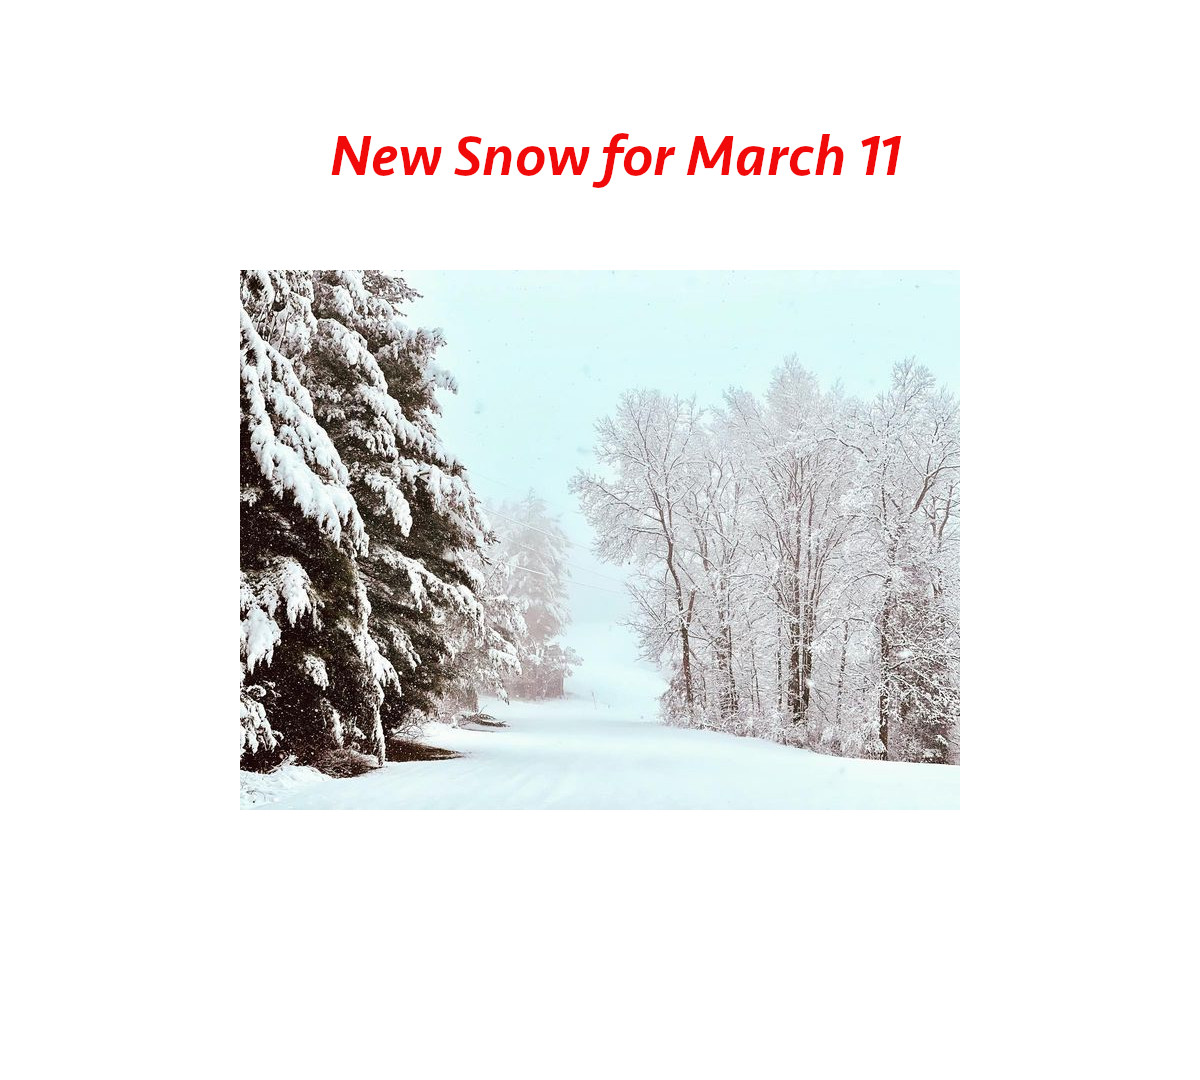 New Snow for March 11